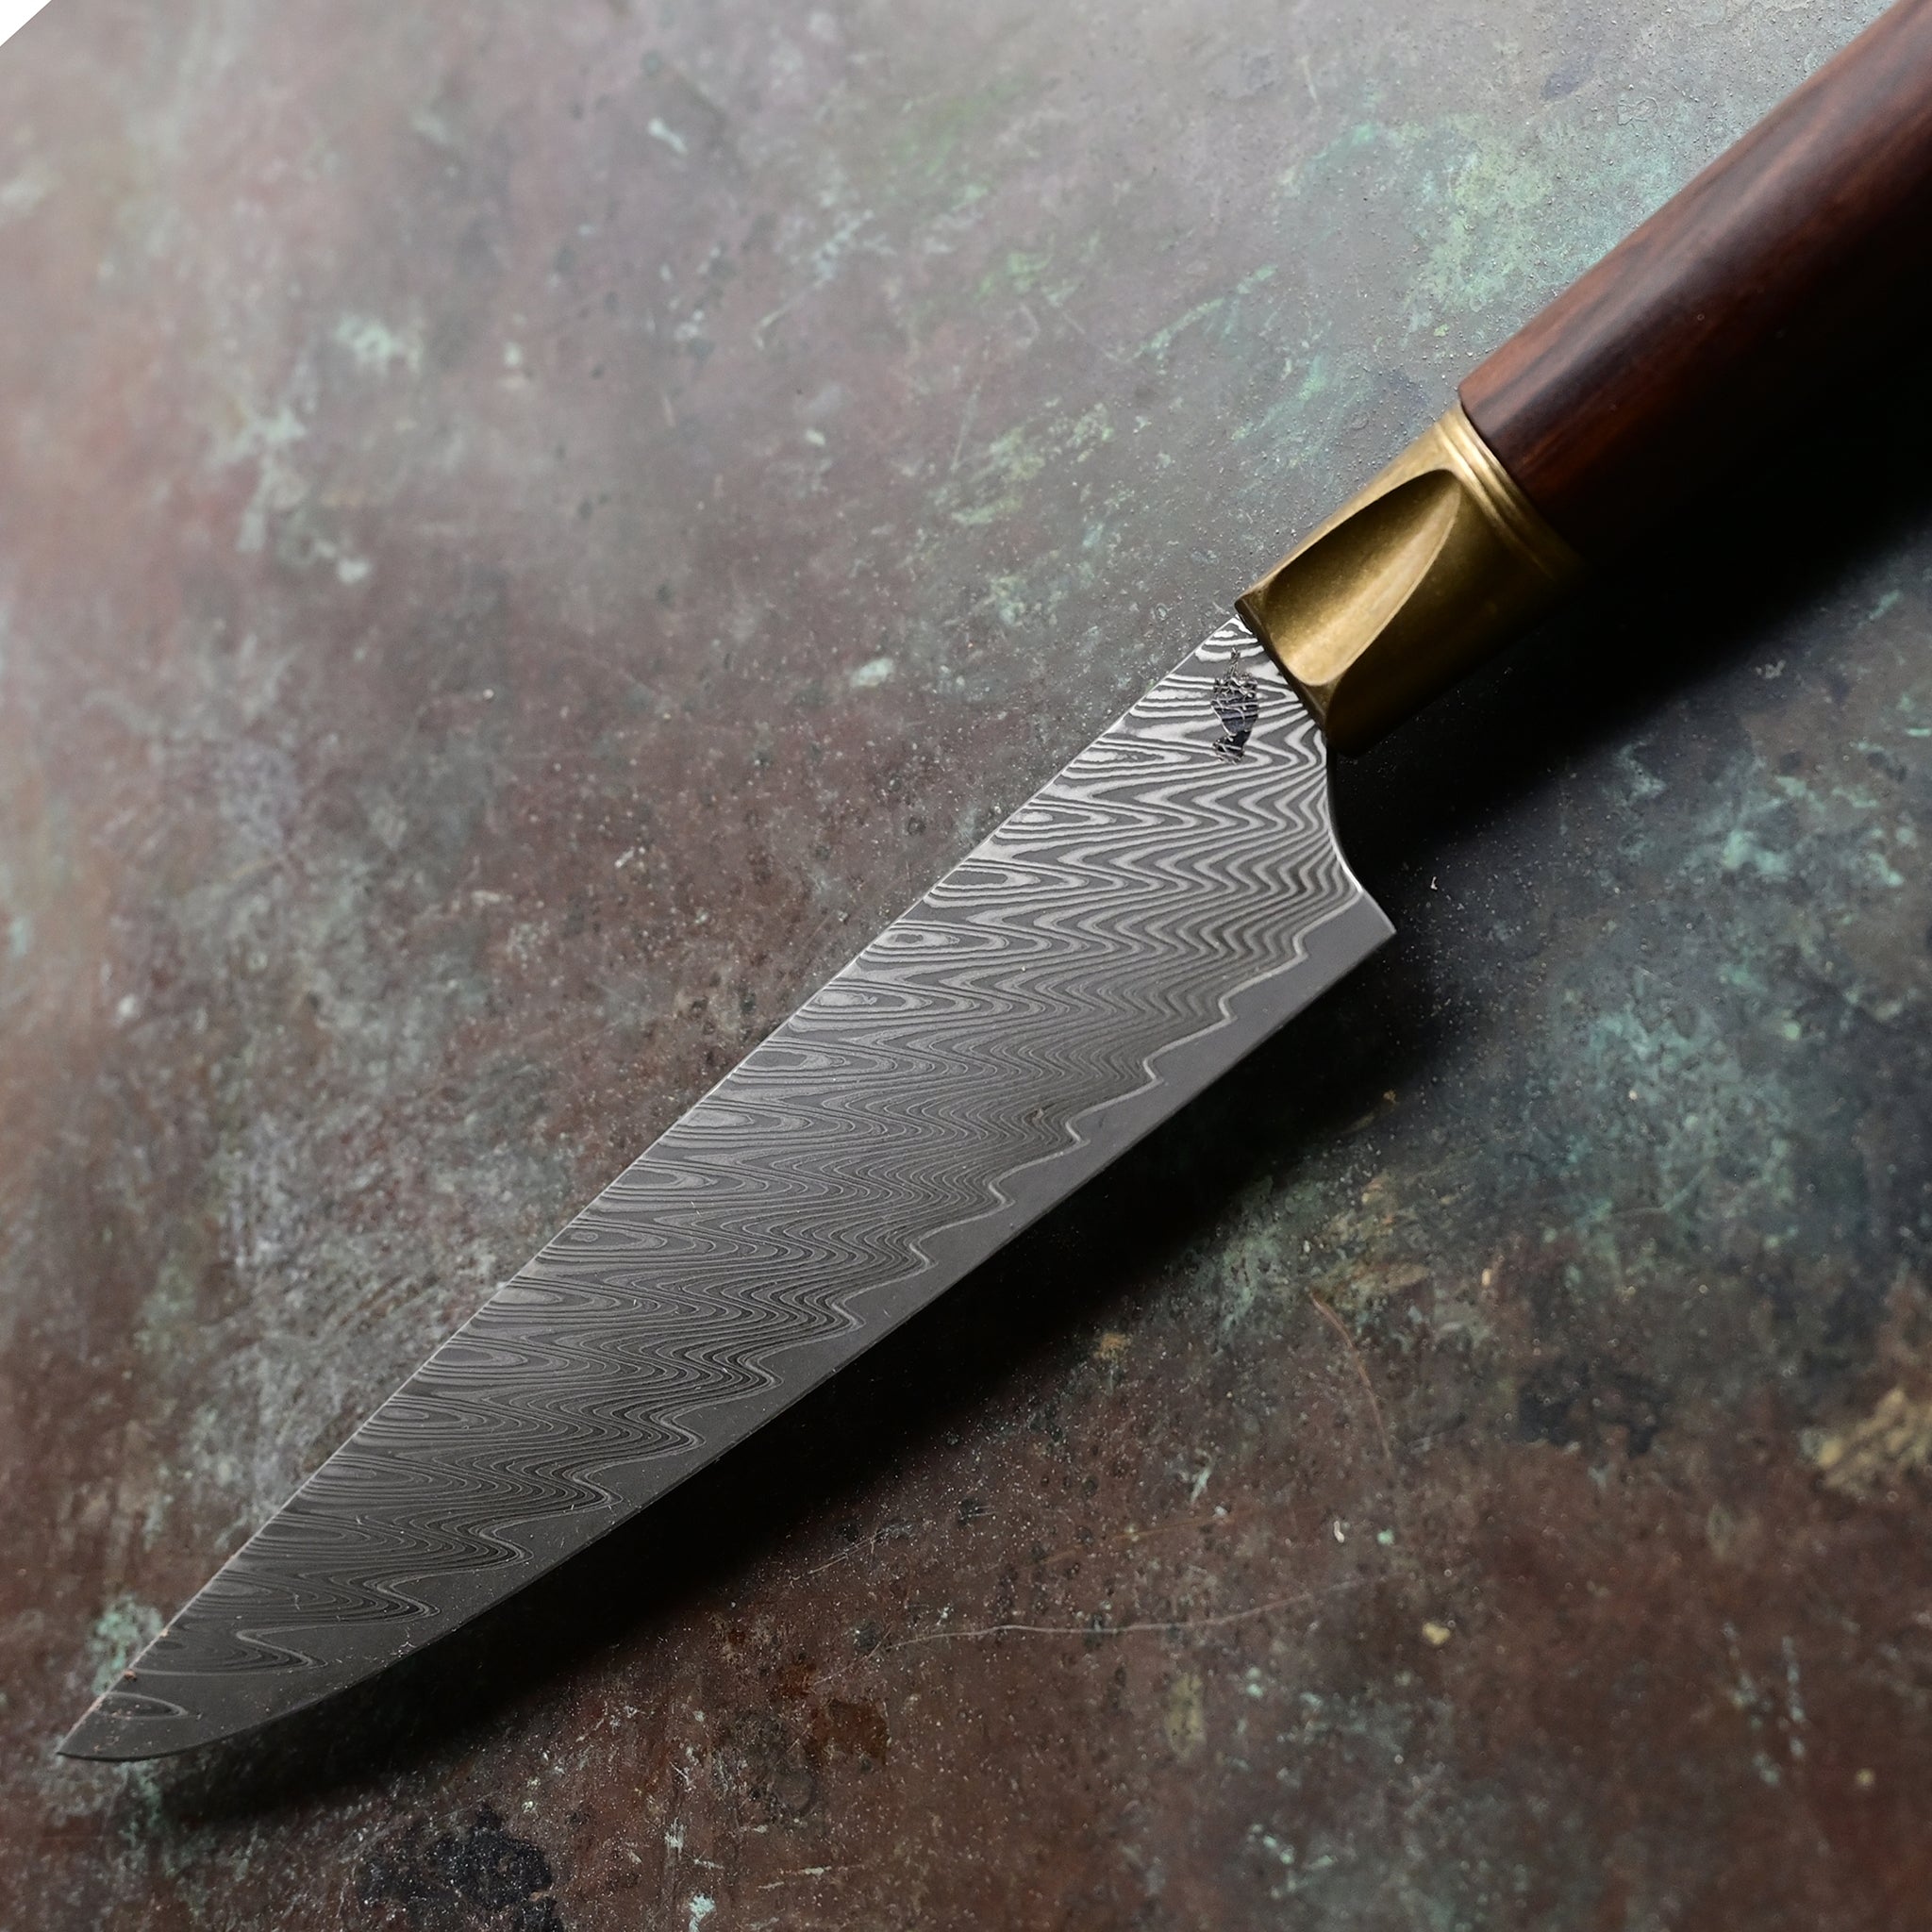 Damascus Steel Store - Sharpest Knives at Slashed Prices